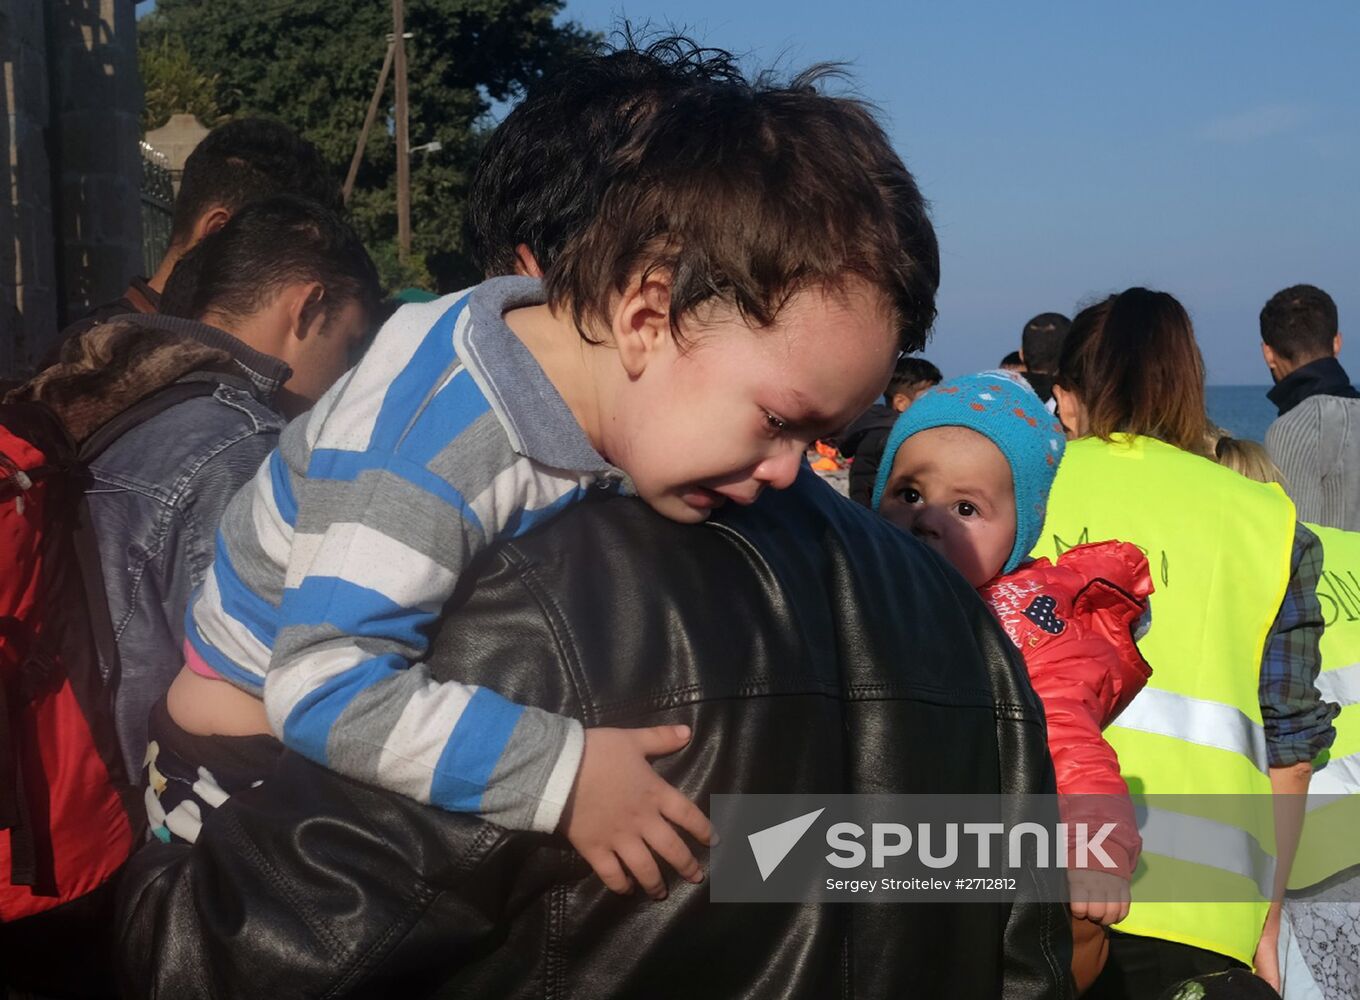 Middle Eastern refugees on Lesbos island in Greece